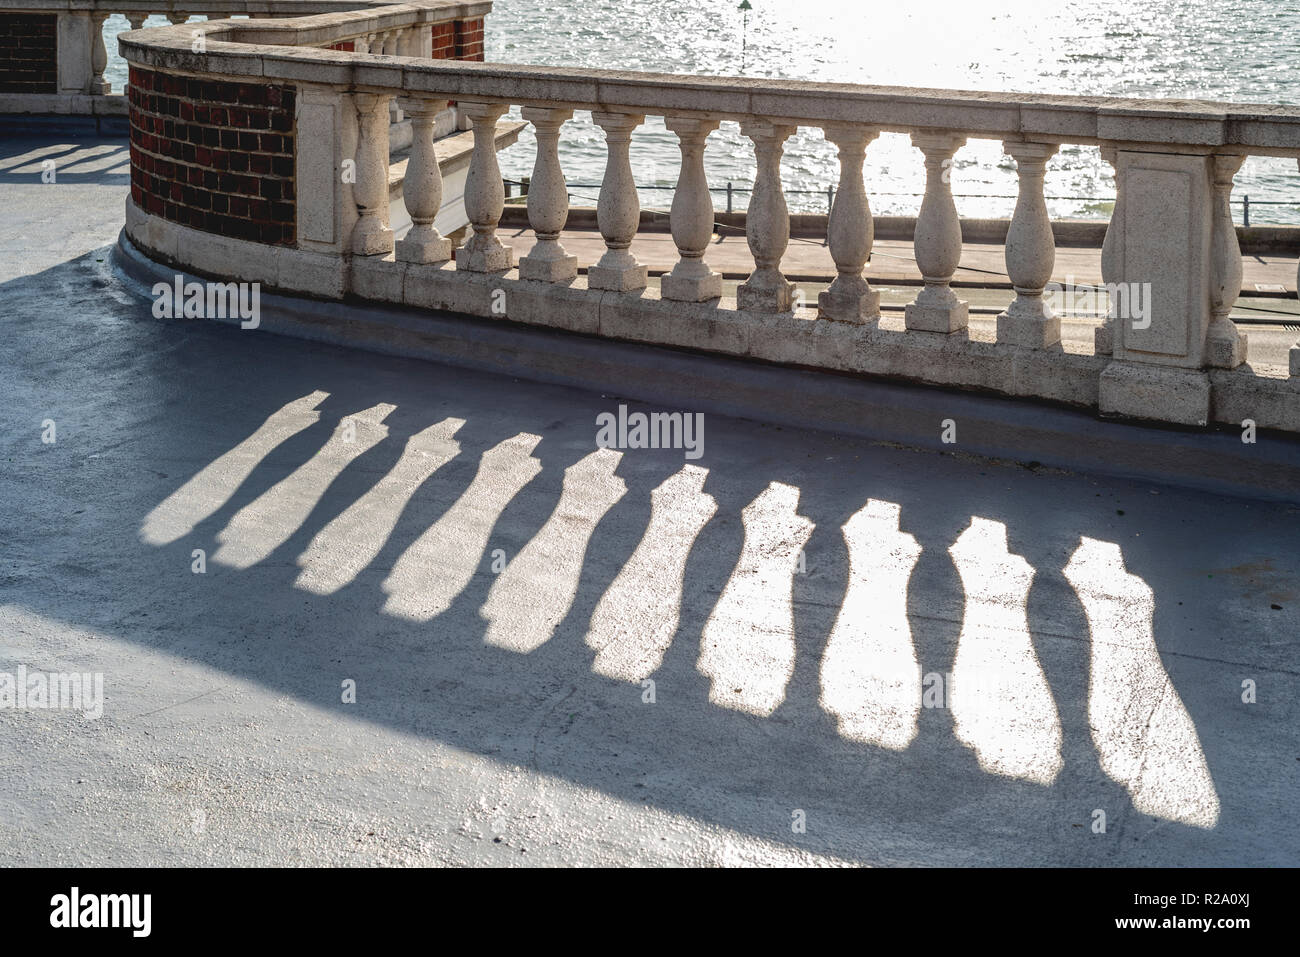 Vintage curved stone balustrade, with stone capping and red brickwork. Stock Photo